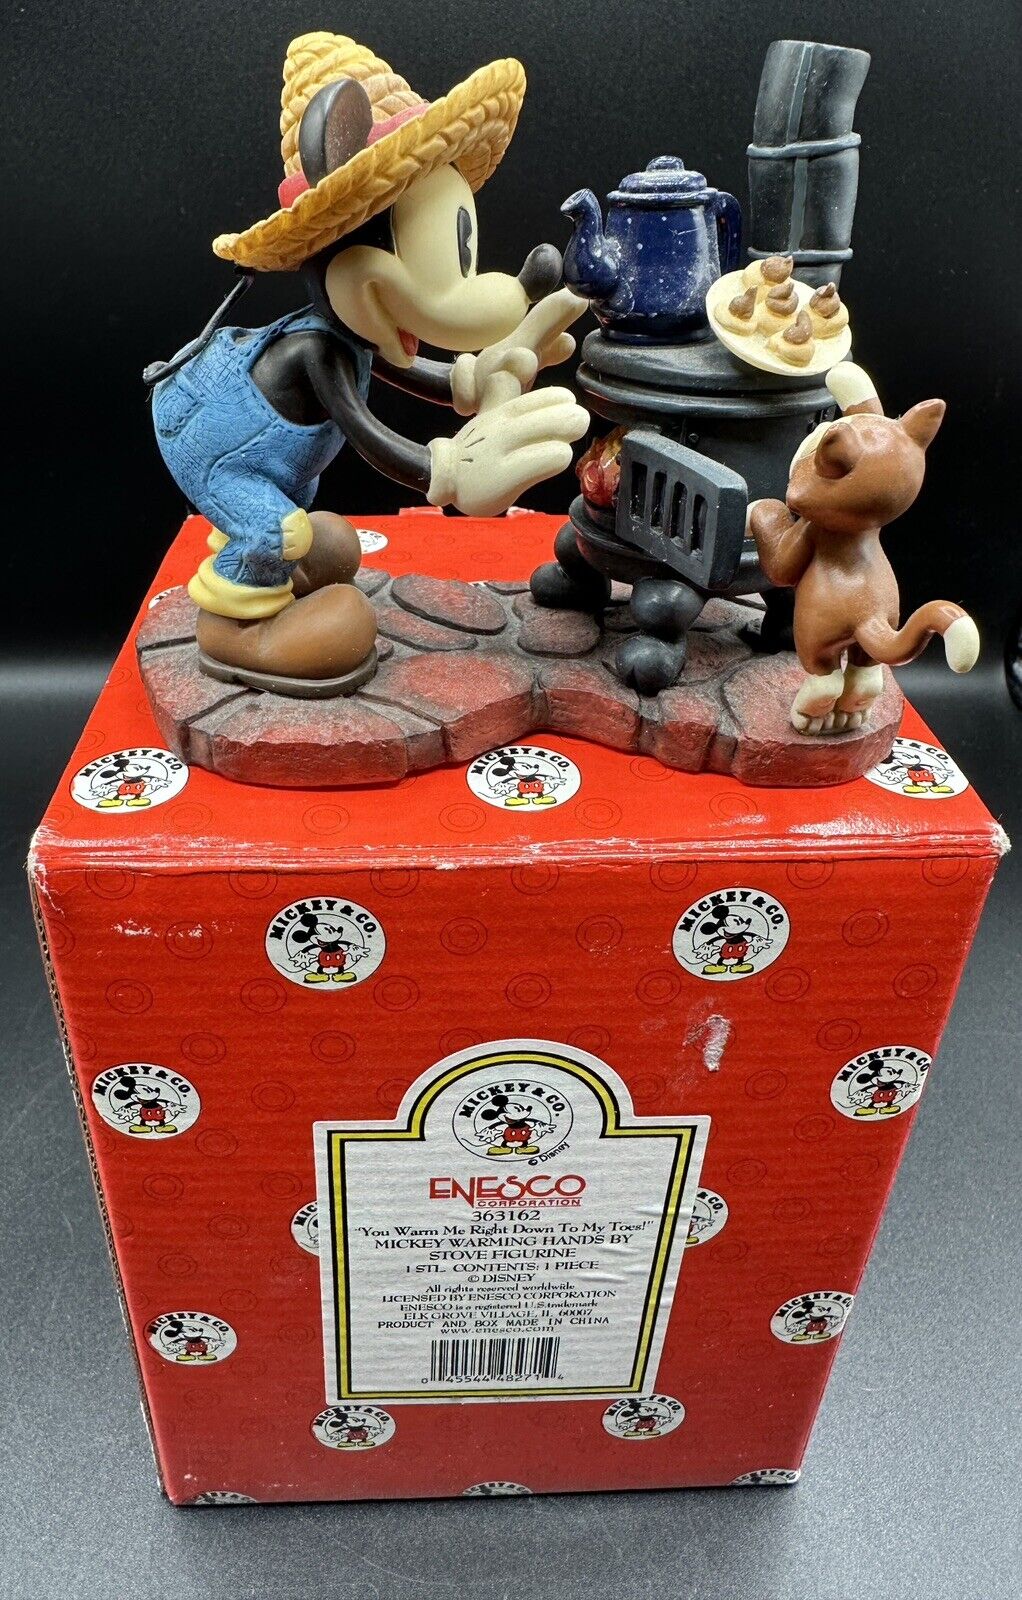 Disney 363162  Enesco Mickey Mouse Figurine “You Warm Me Right Down To My Toes”